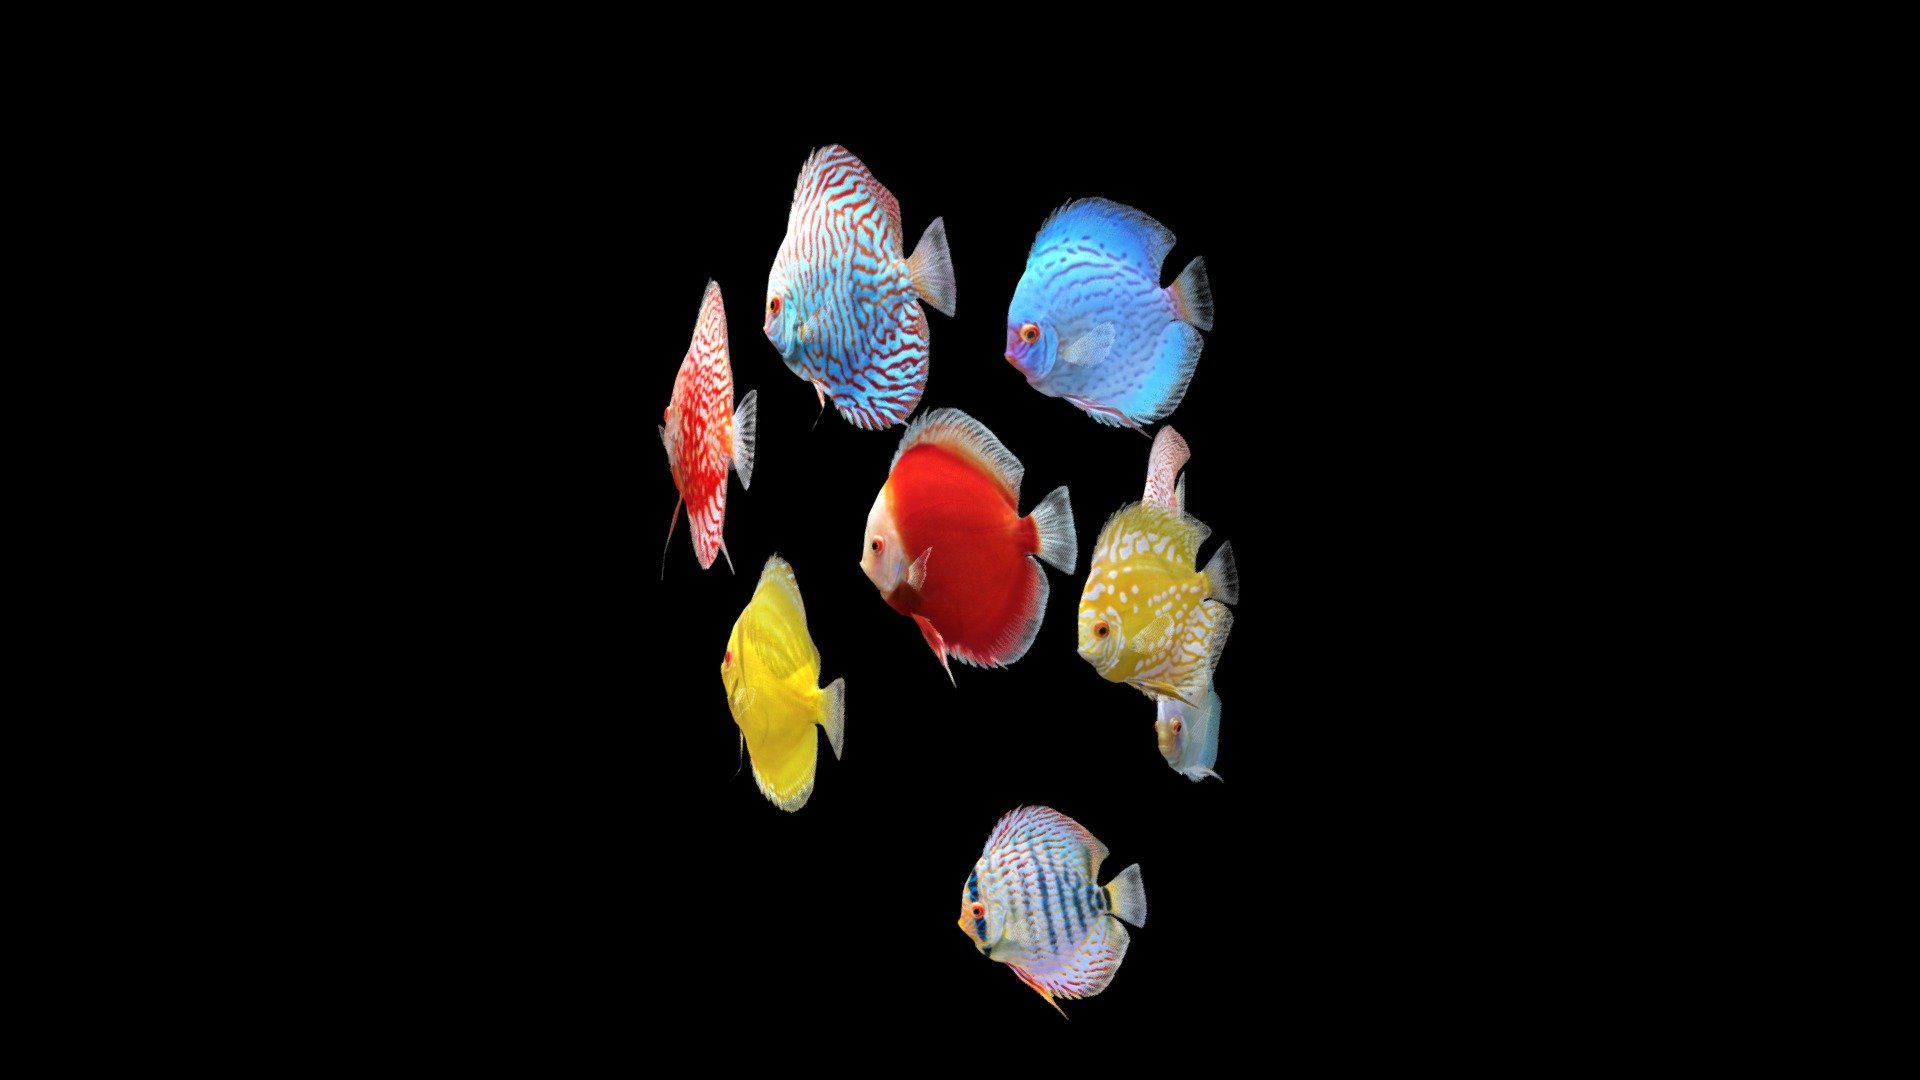 Before purchasing this model, you can free download Emperor Angelfish and try to import it. 



The realistic model of Discus fish. 

This animation has a loop 2335 frames (1min 18 sec). These fish were created in Maya. Each fish has 3 type of textures (albedo, metallic, normal).



The pack includes 9 animated Discus fish



1 Discus Albino Millennium Gold

2 Discus Albino Snakeskin

3 Discus Brilliant Turquoise

4 Discus Checkerboard Pigeon

5 Discus Heckel Cross

6 Discus Leopard Red Spotted

7 Discus Red Passion

8 Discus Red Map Checkerboard

9 Discus Yellow Marlboro



Dear Blender Users If you have any problems importing into a Blender, please email me, this problem is solved 3d model